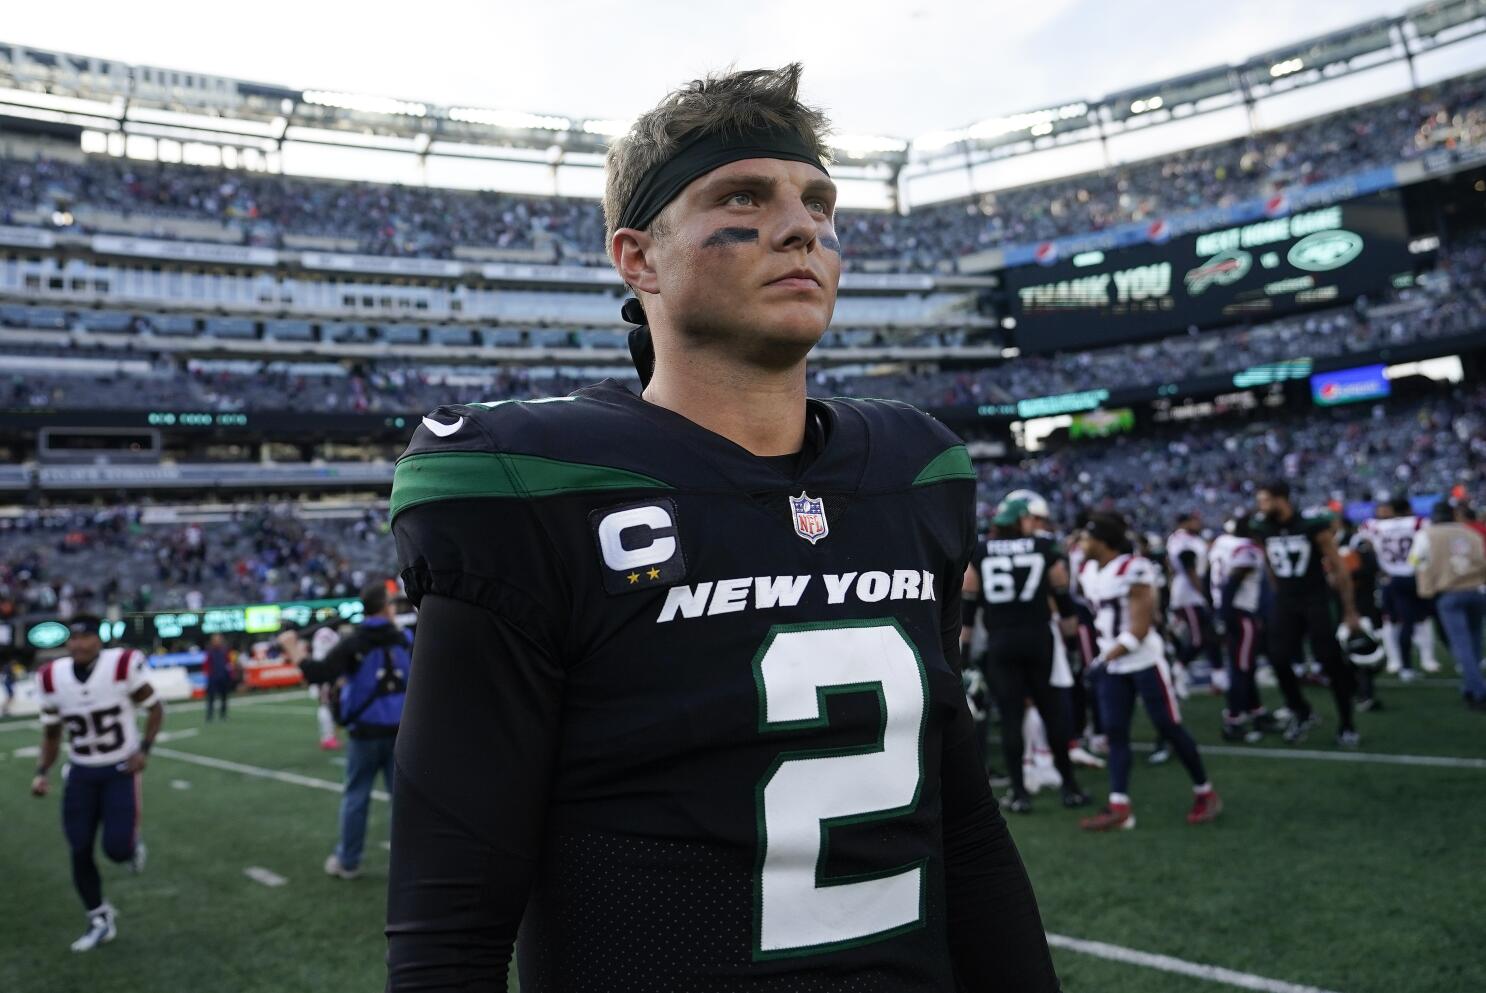 Jets, Wilson miss chance to assert themselves in Pats loss